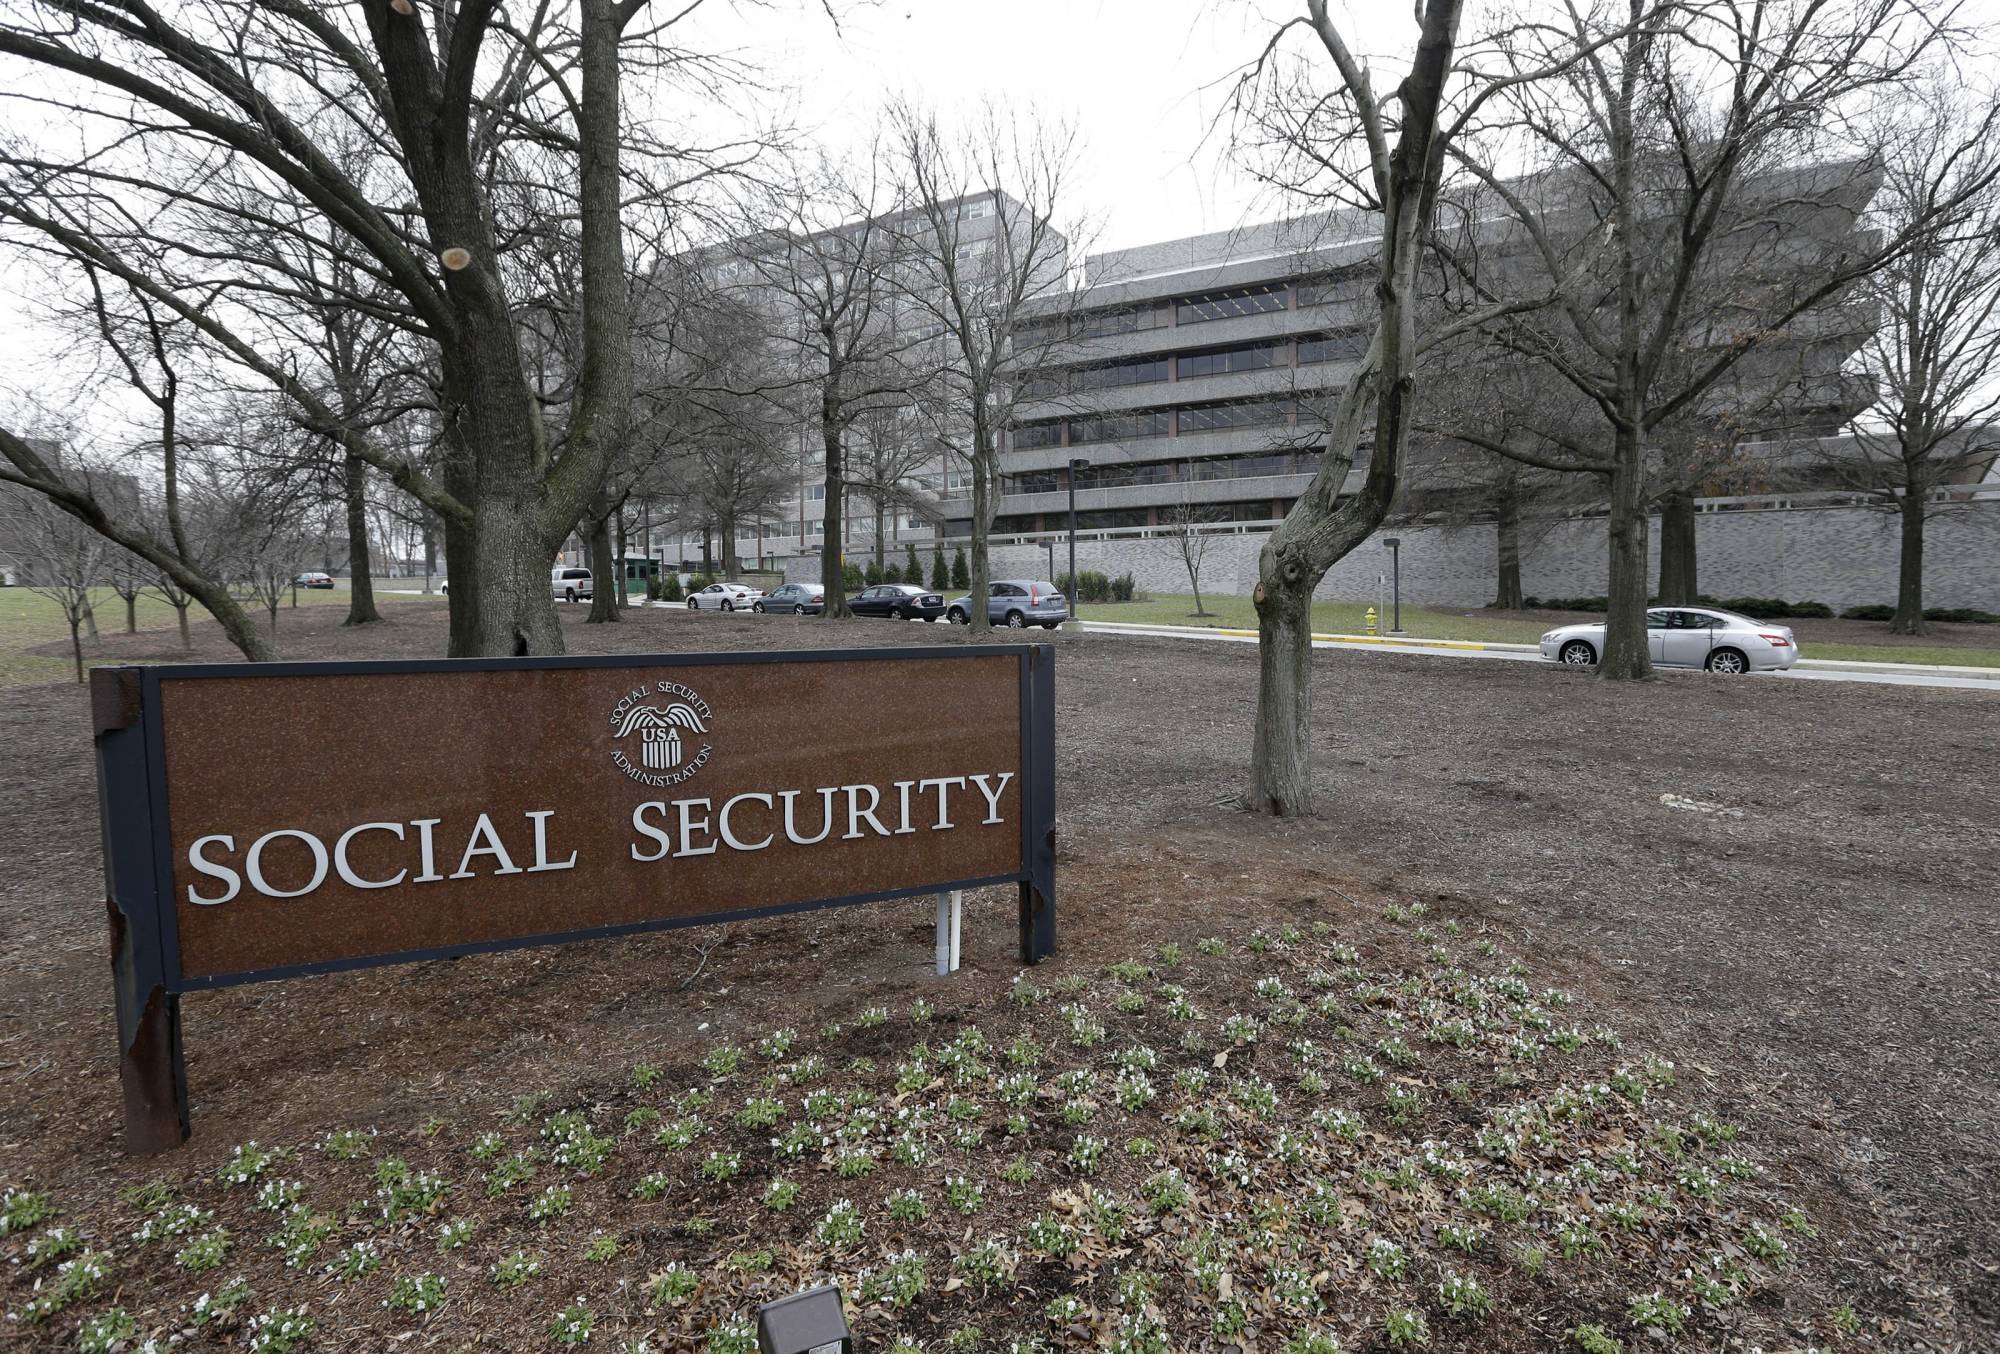 FILE - In this Jan. 11, 2013 file photo, the Social Security Administration's main campus is seen in Woodlawn, Md. Millions of Social Security recipients and other retirees can expect another small increase in benefits in 2018. Preliminary figures suggest an increase of around 2 percent. That would mean an extra $25 a month for the average beneficiary. The Social Security Administration is scheduled to announce the cost-of-living adjustment on Oct. 13, 2017.(AP Photo/Patrick Semansky, File)